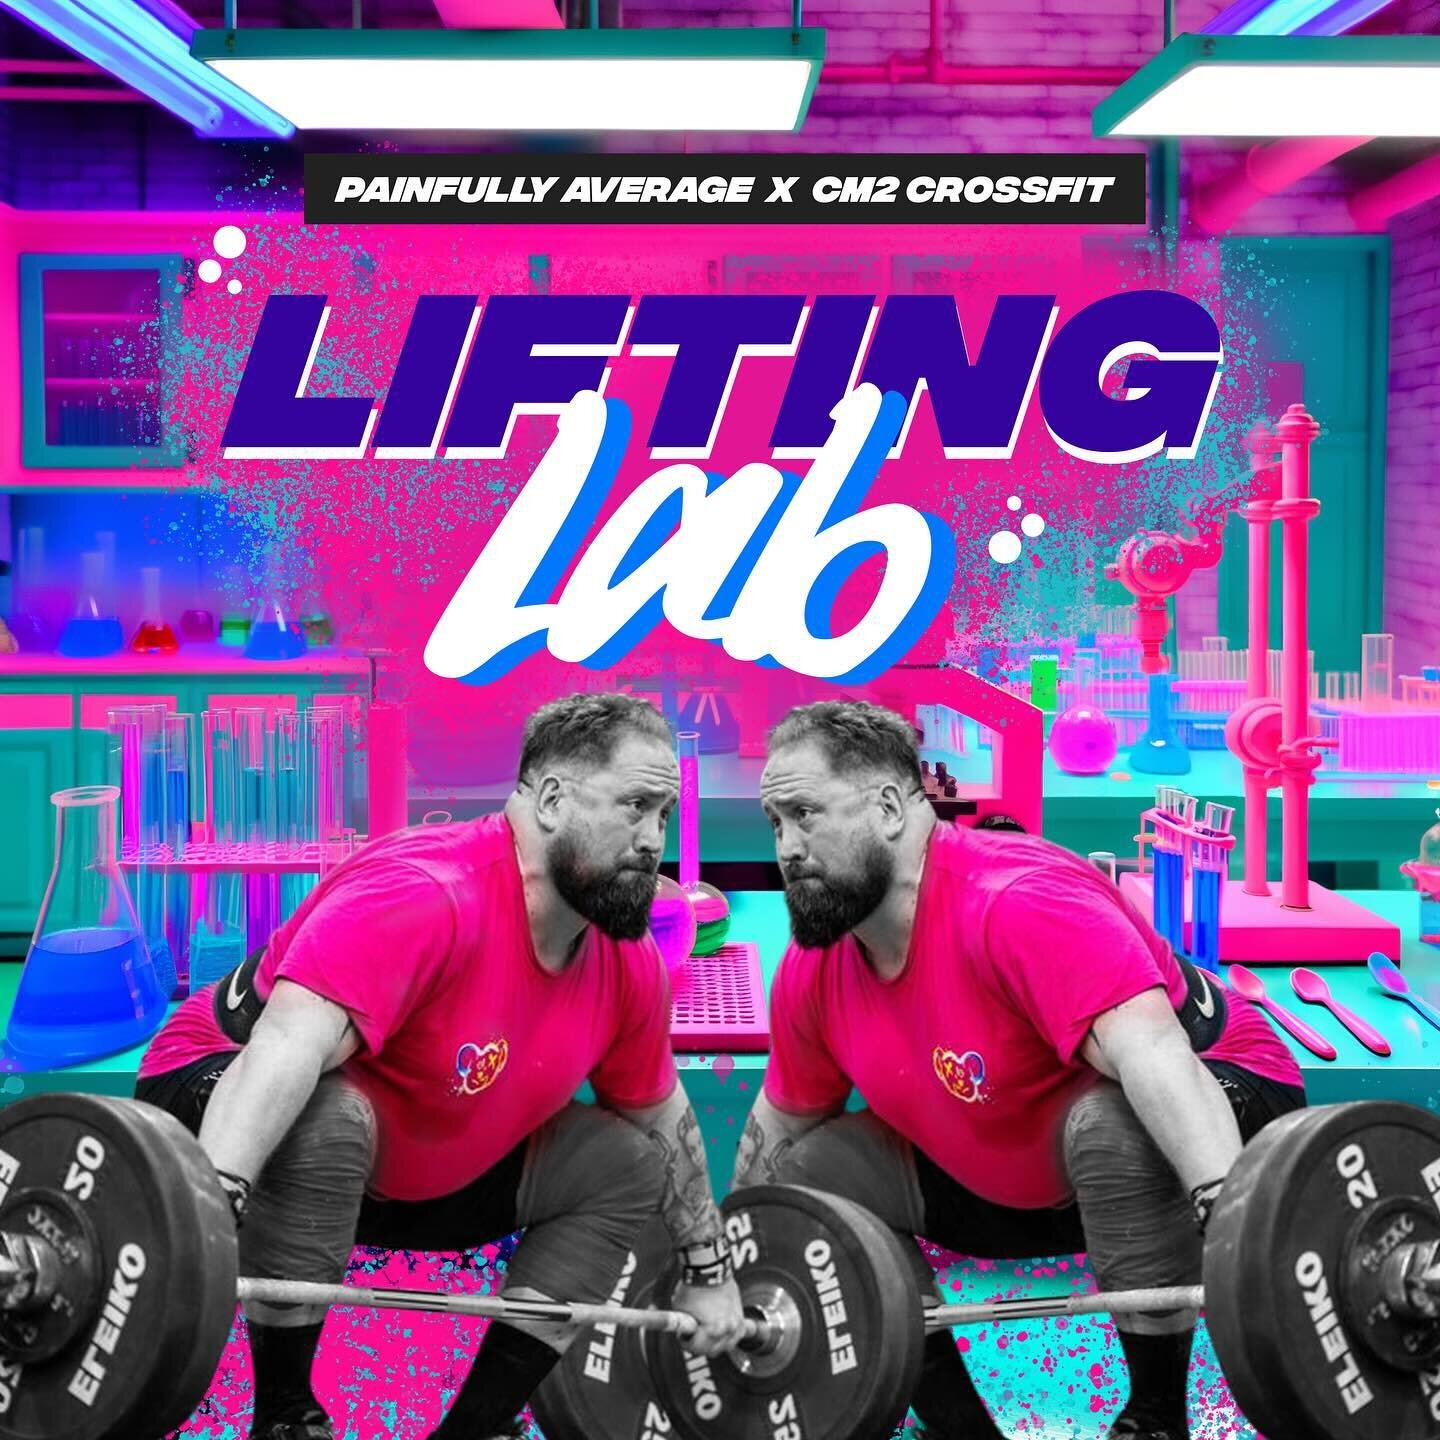 🏋️&zwj;♂️ Elevate your Sunday gains at CM2 CrossFit! 🏋️&zwj;♀️ 

Join the Lifting Lab with Coach Iain from @painfullyaverageweightlifter ! 🌟 

Unleash your inner powerhouse with expert guidance in Olympic lifting every Sunday from 1-3 PM. 🔥 

Onl